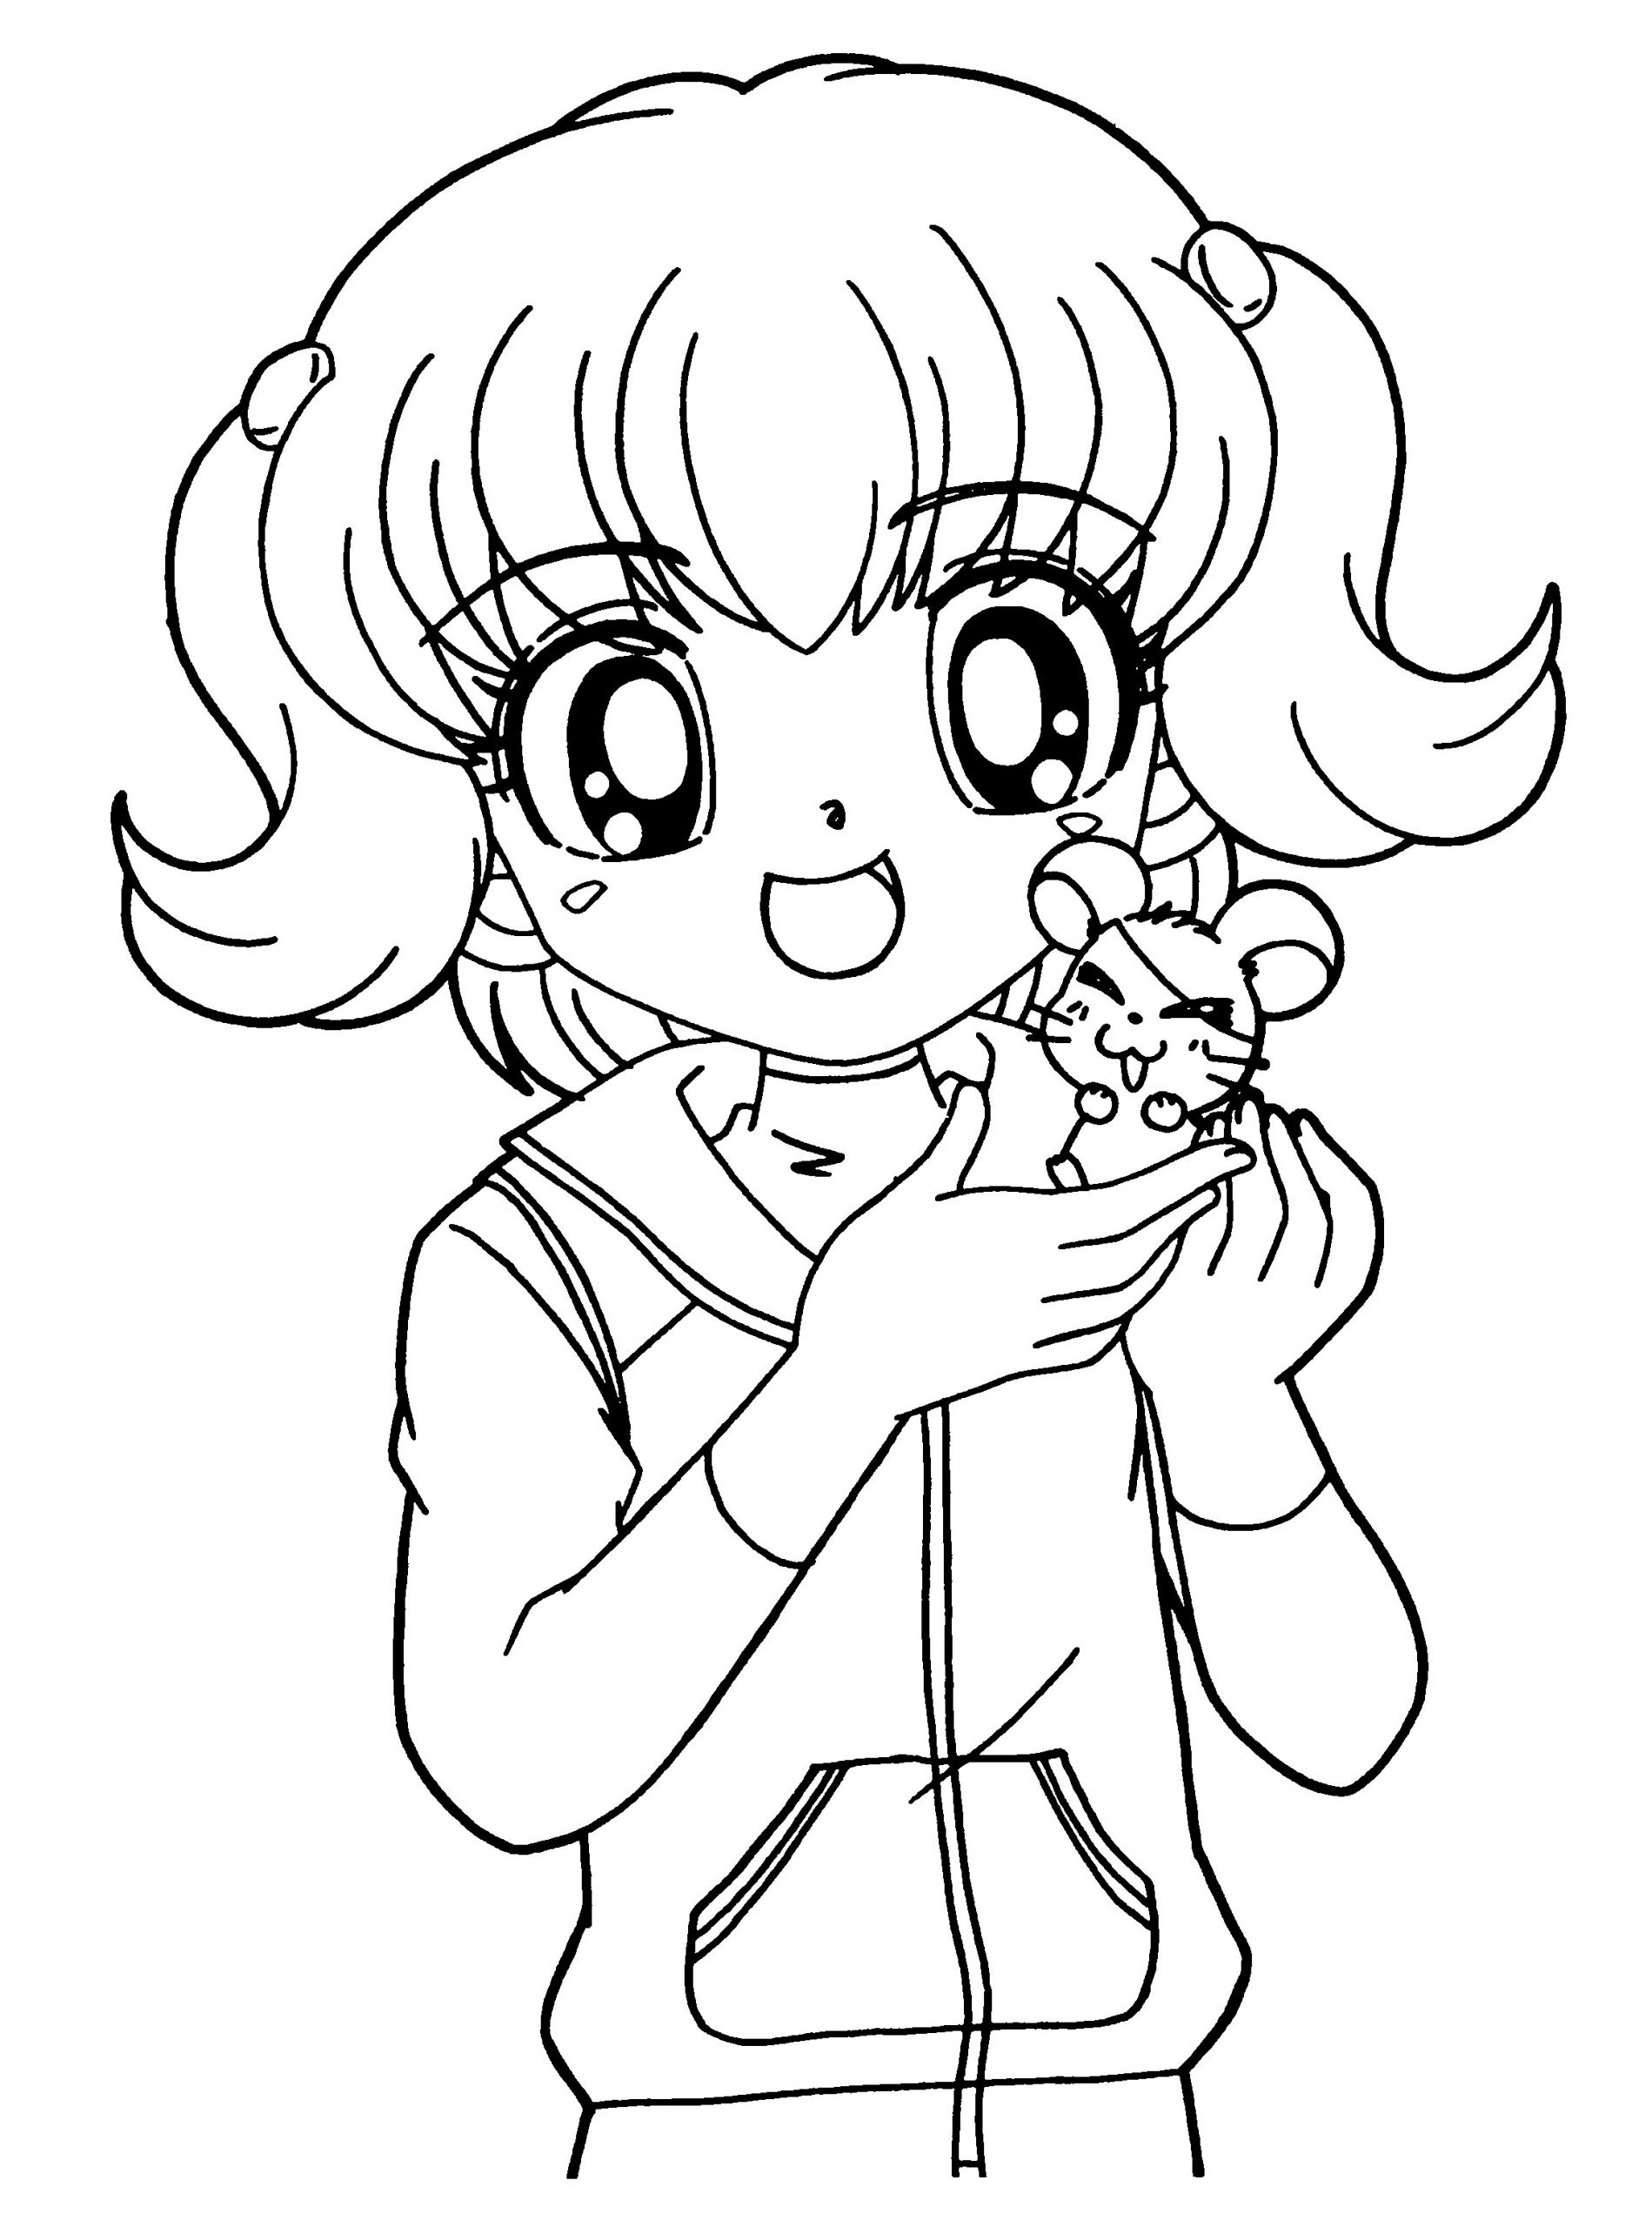 Coloring Pages For Girls Cute
 Cute Anime Girl Coloring Pages to Print